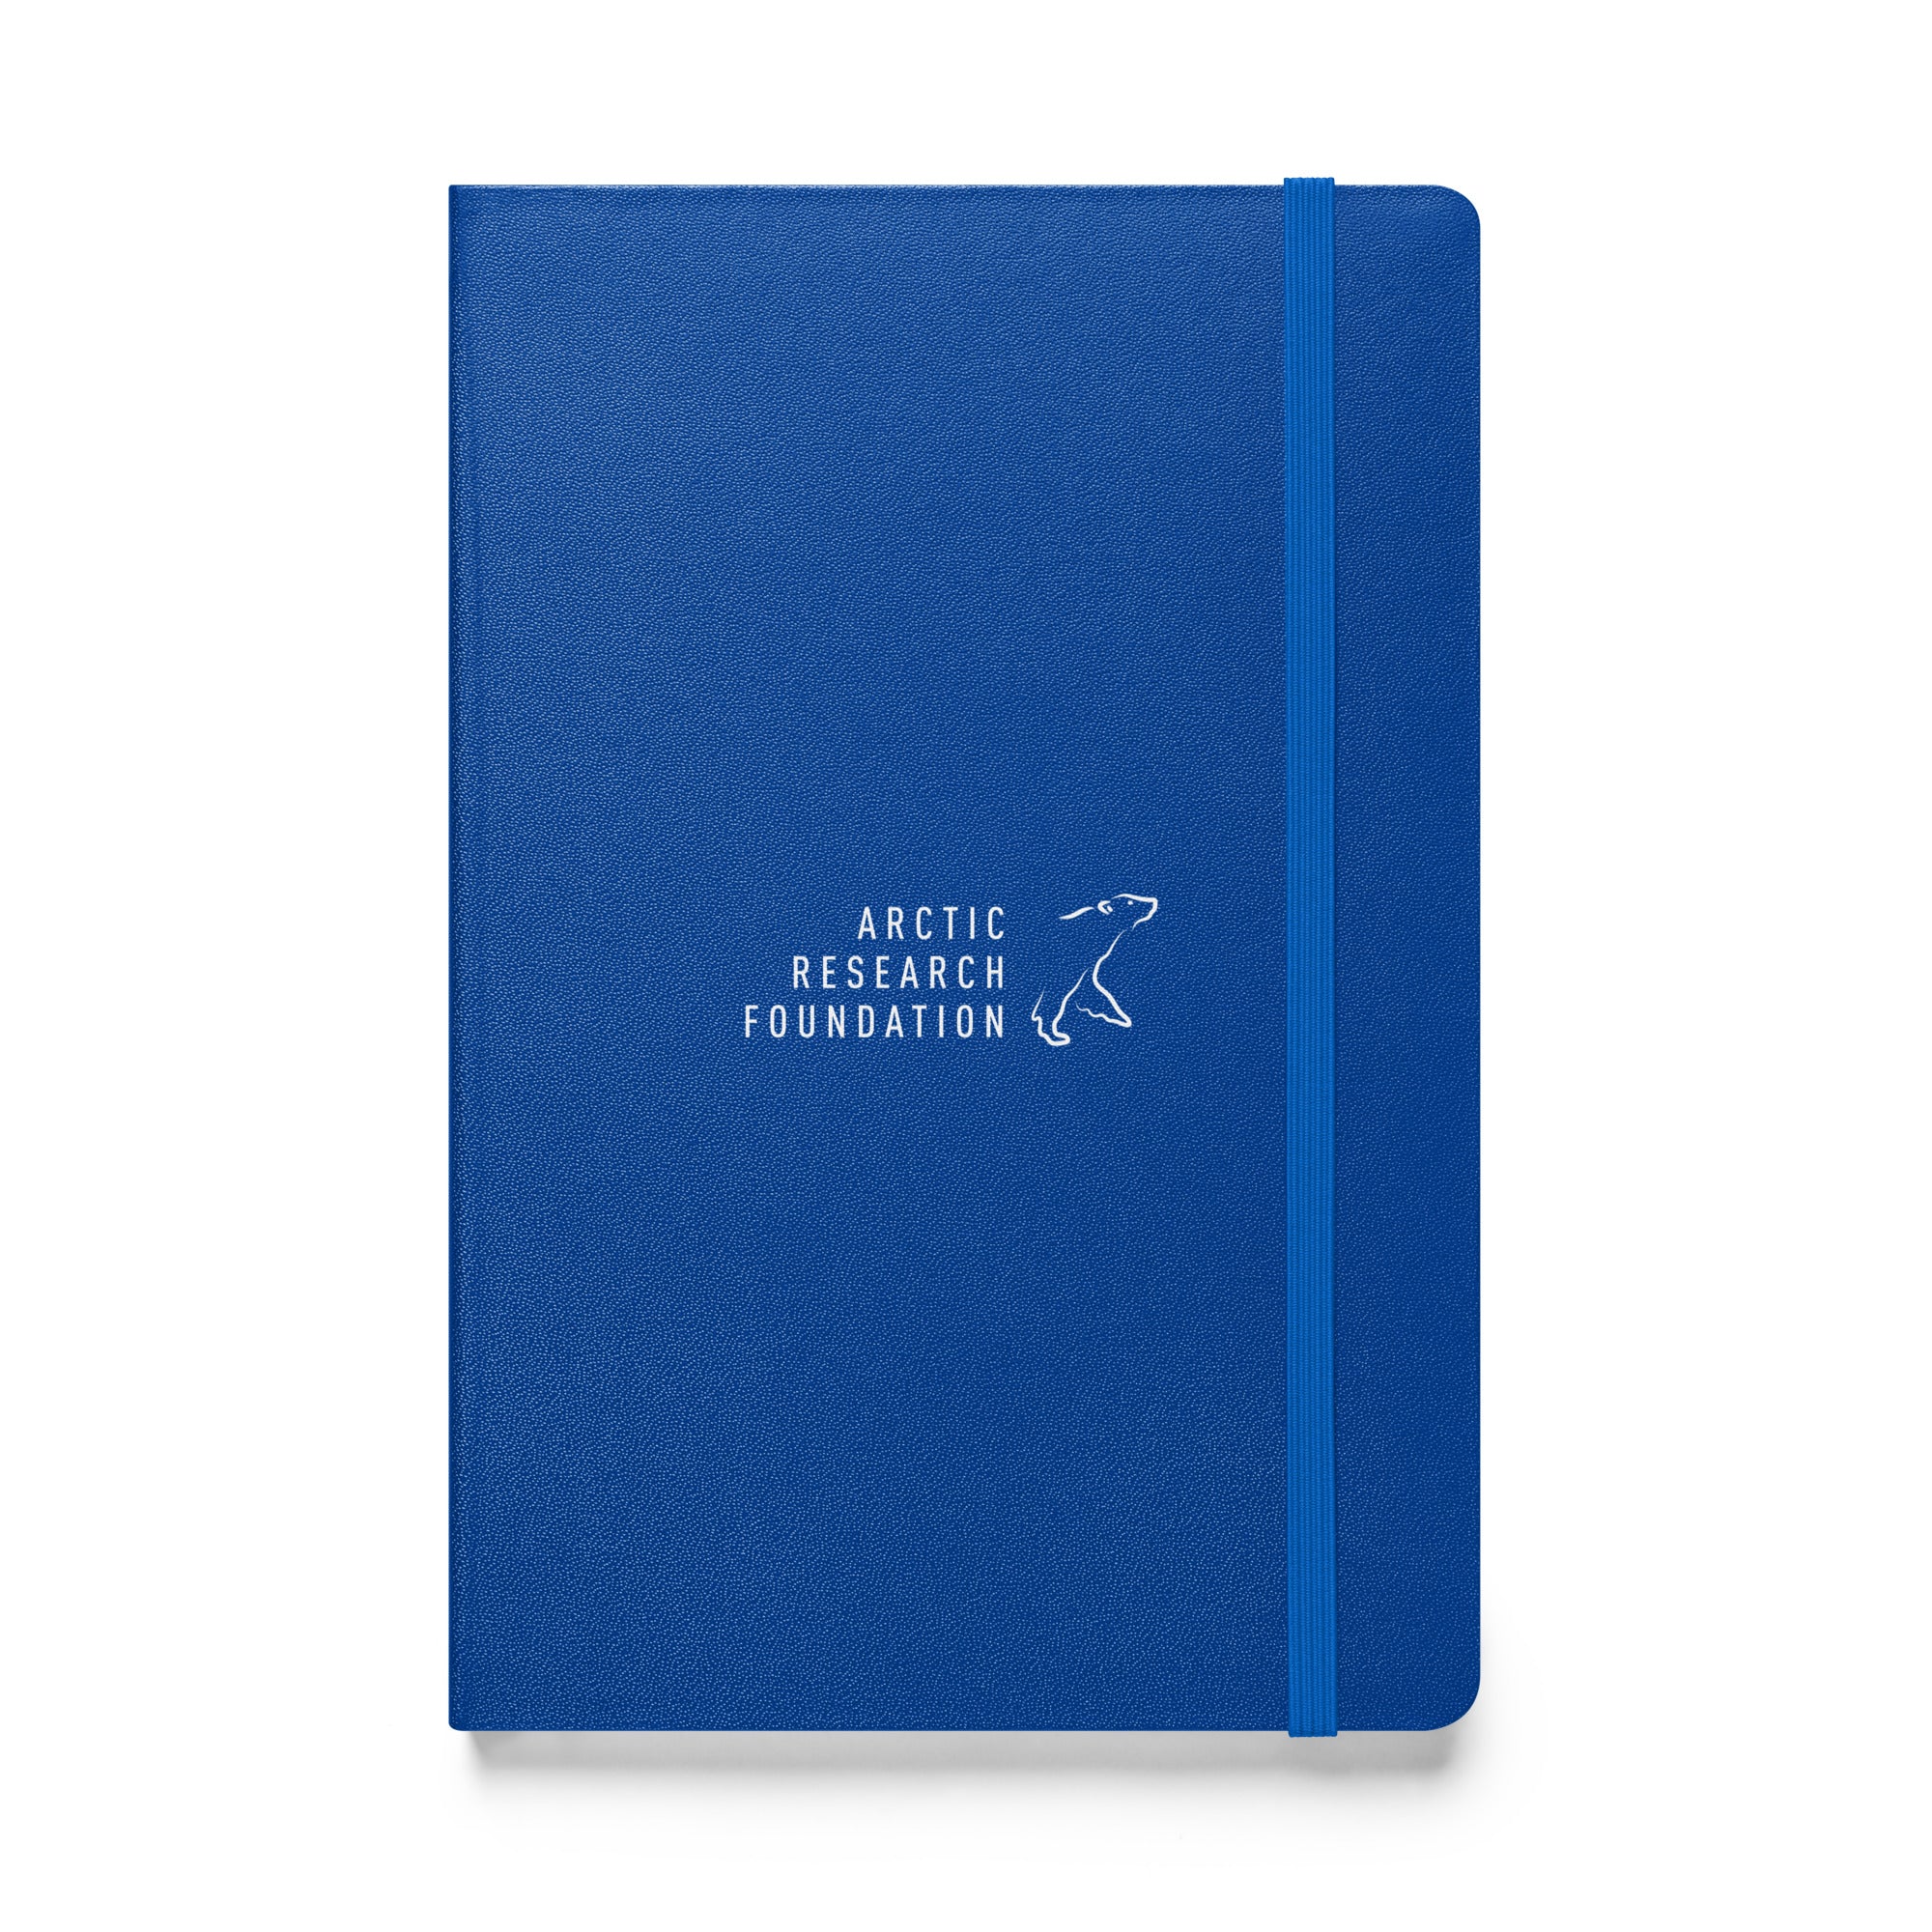 Arctic Research Foundation Hardcover Notebook